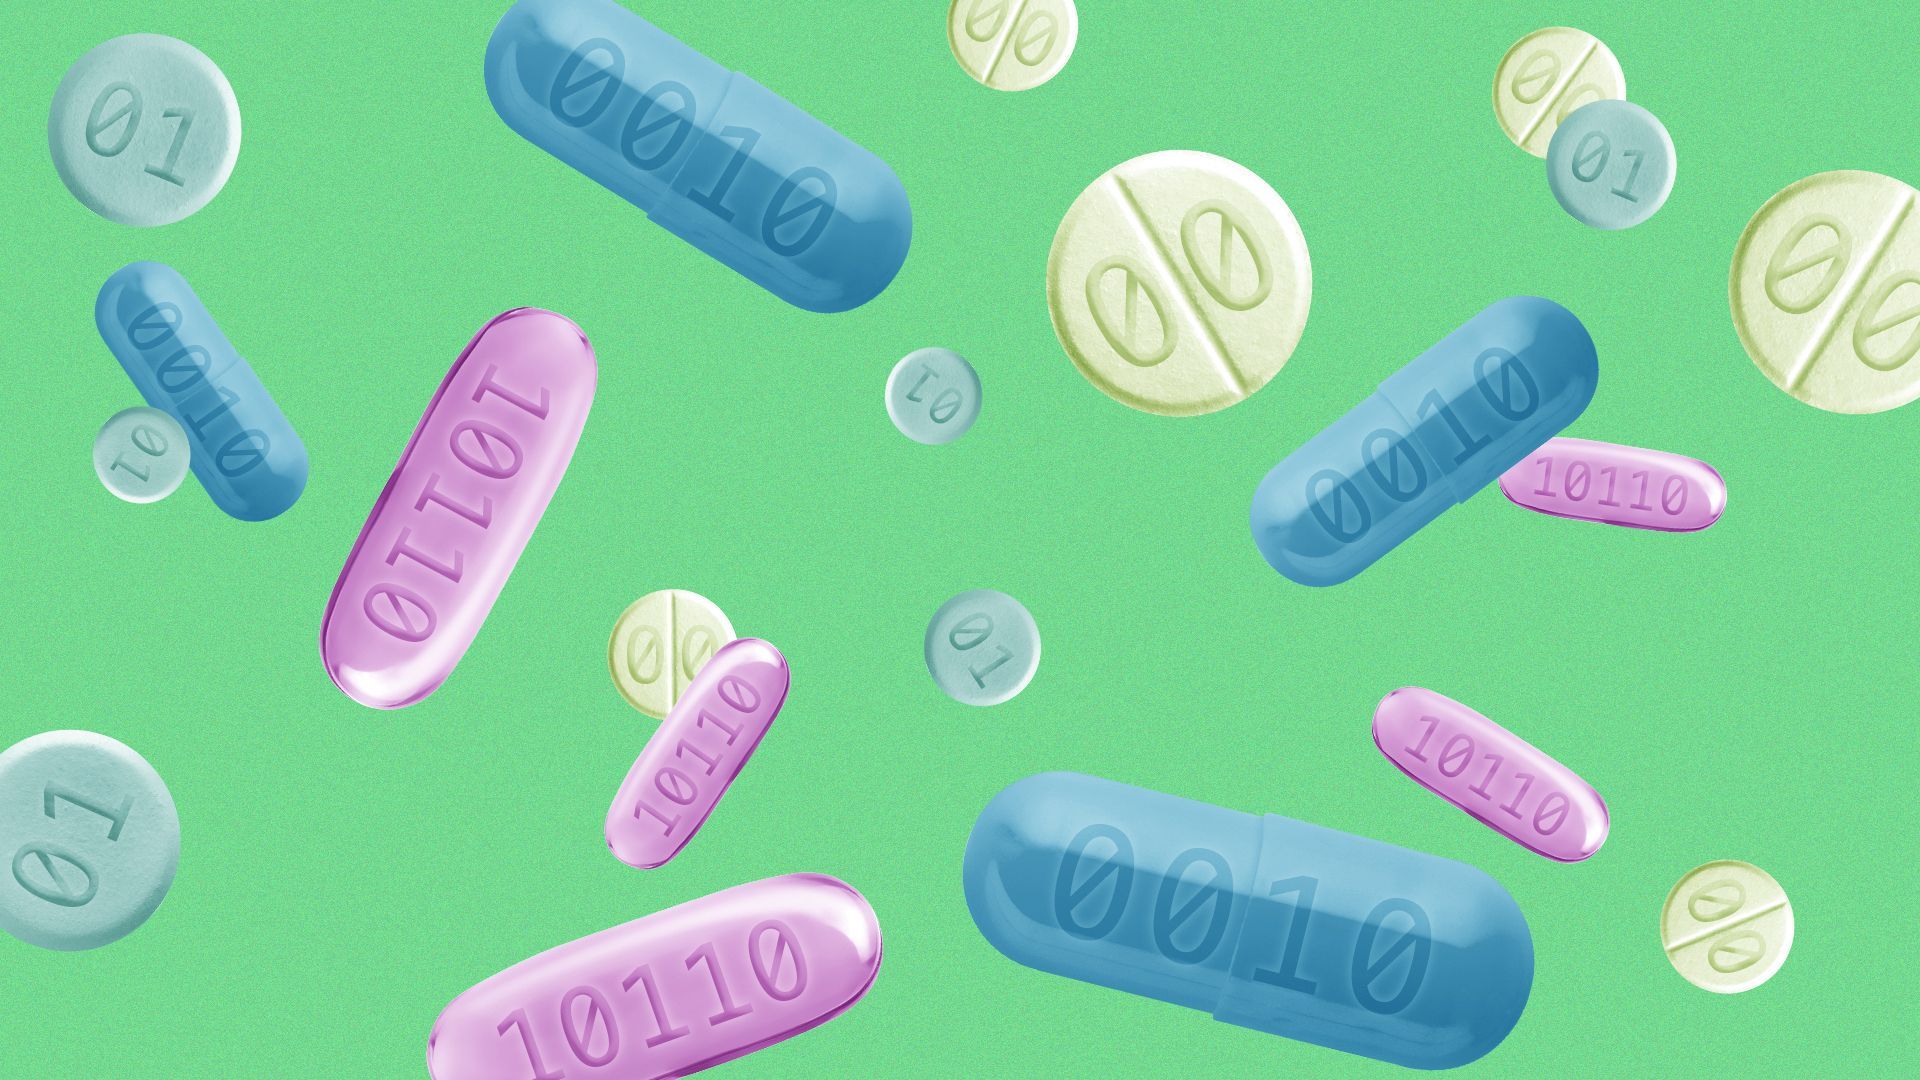 Illustration of a pattern of pills with binary code on them